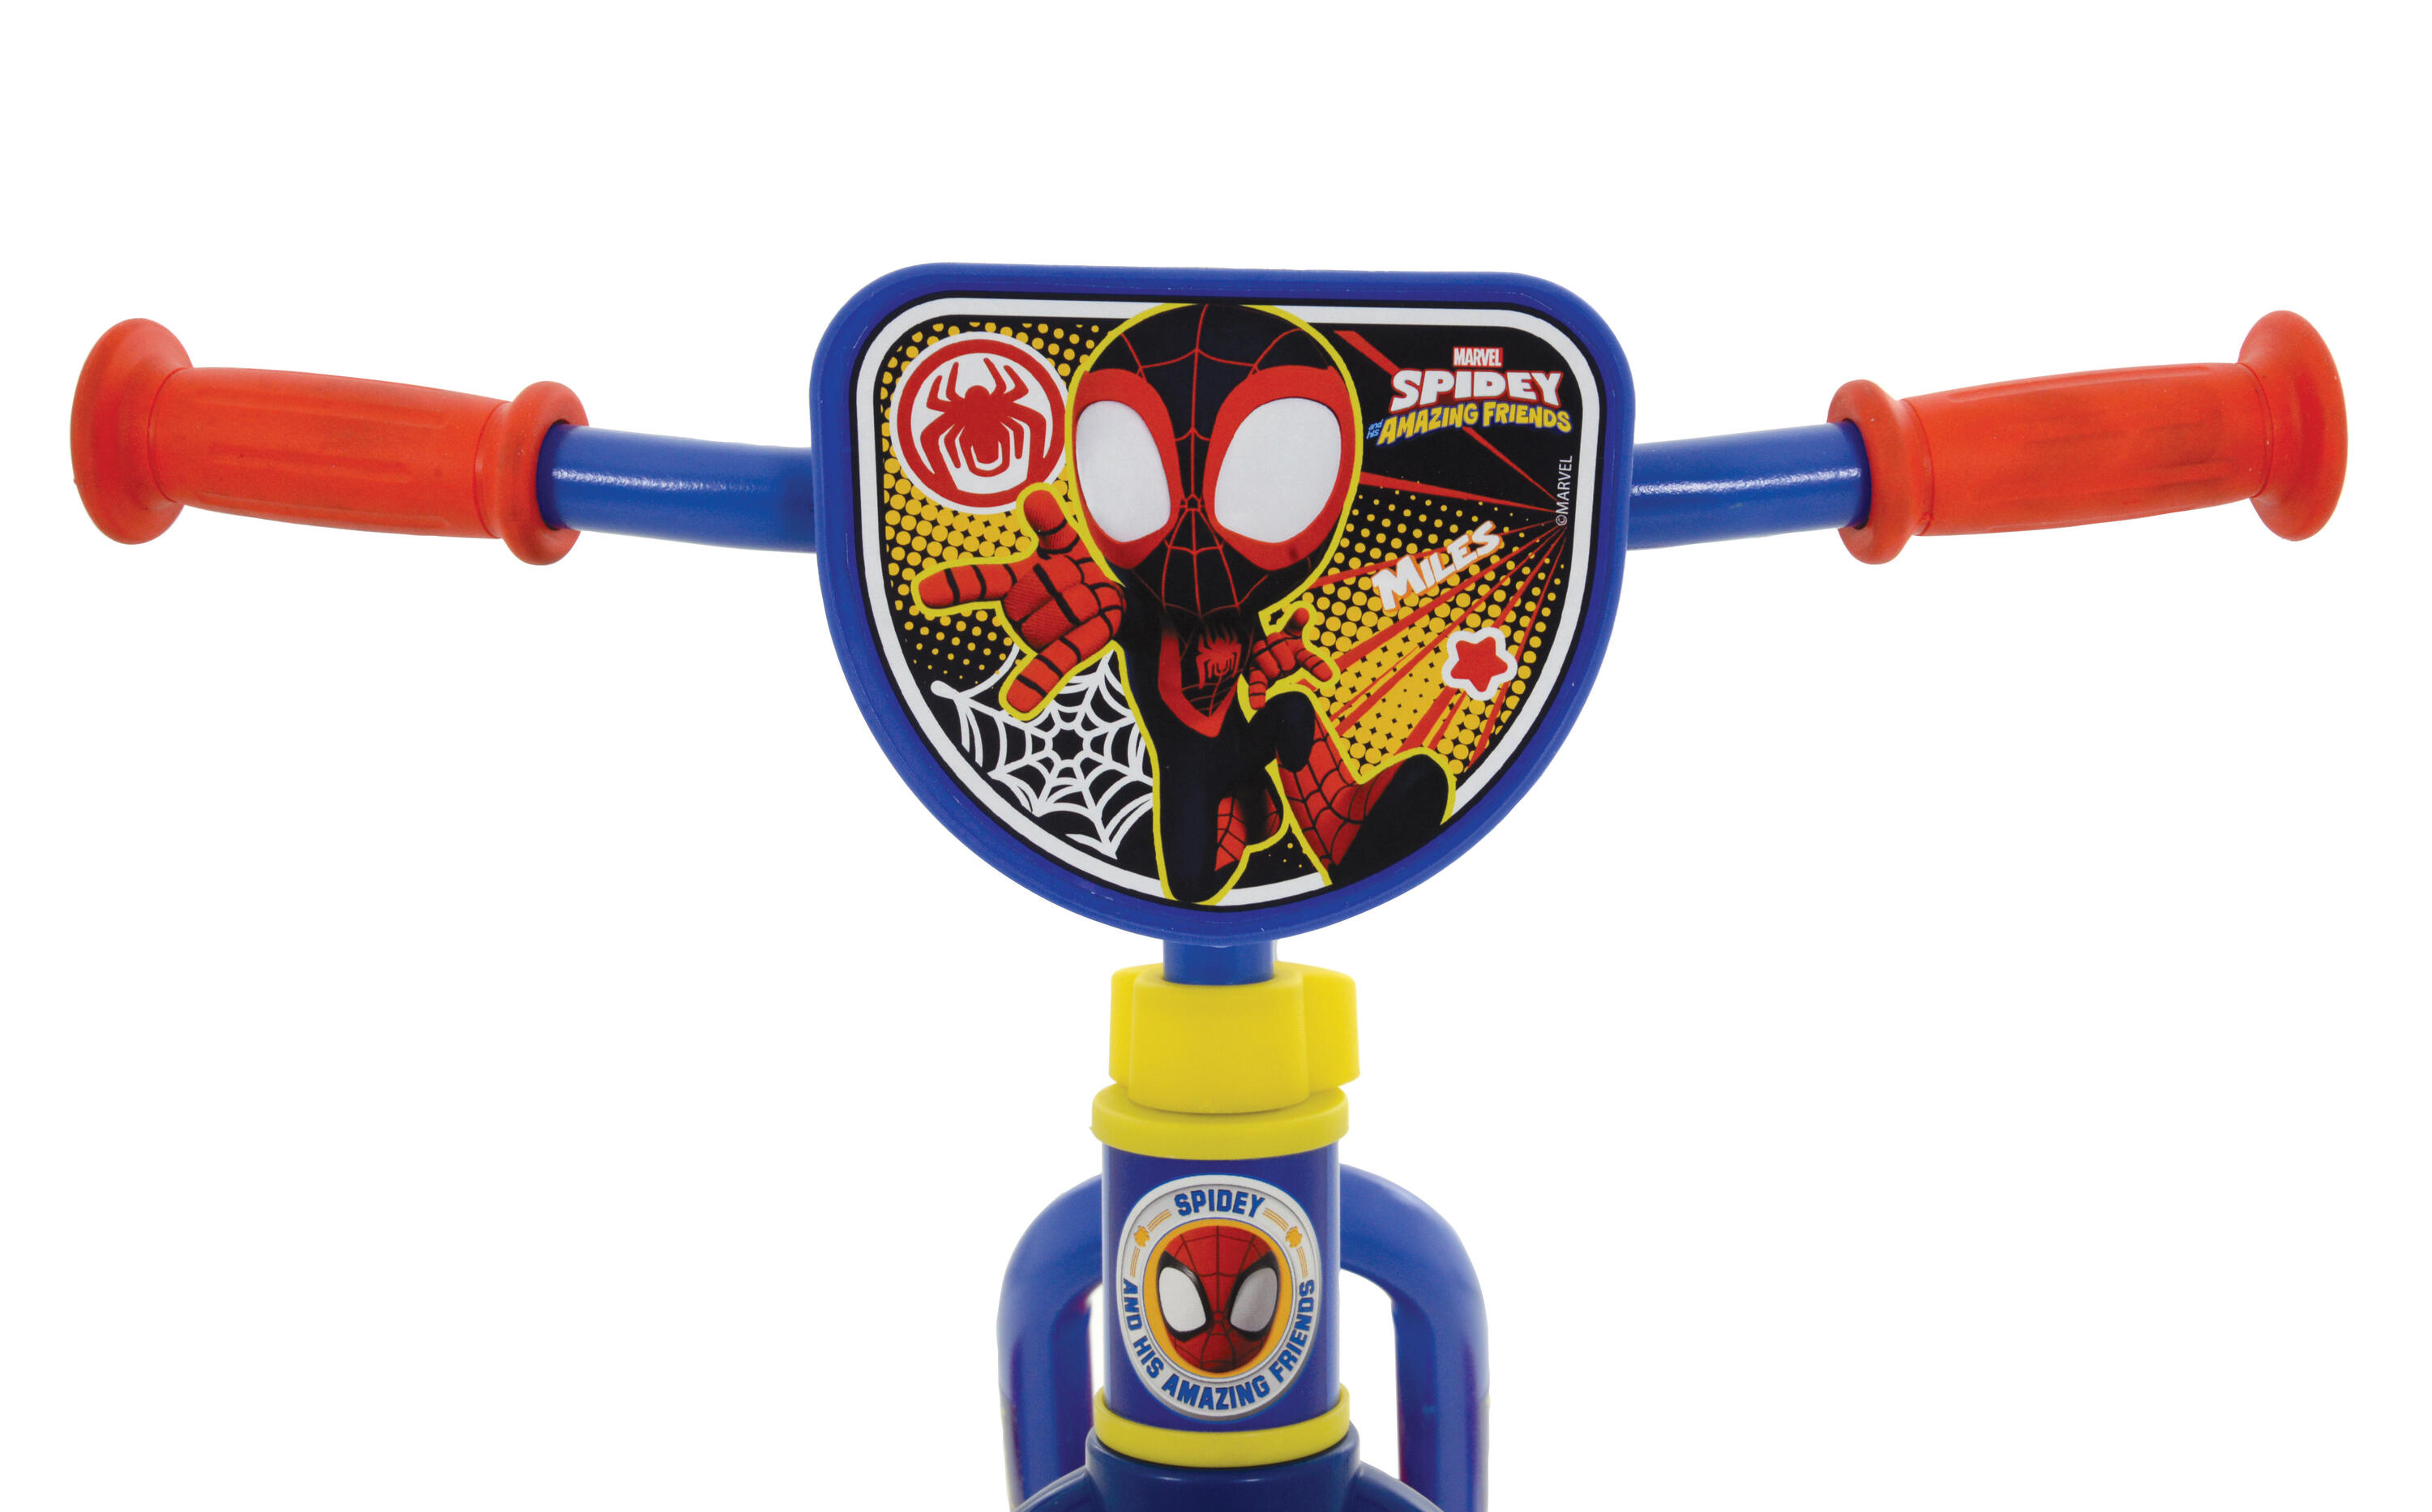 Spidey and his Amazing Friends Switch It Multi Character 2-in-1 Training Bike 4/7